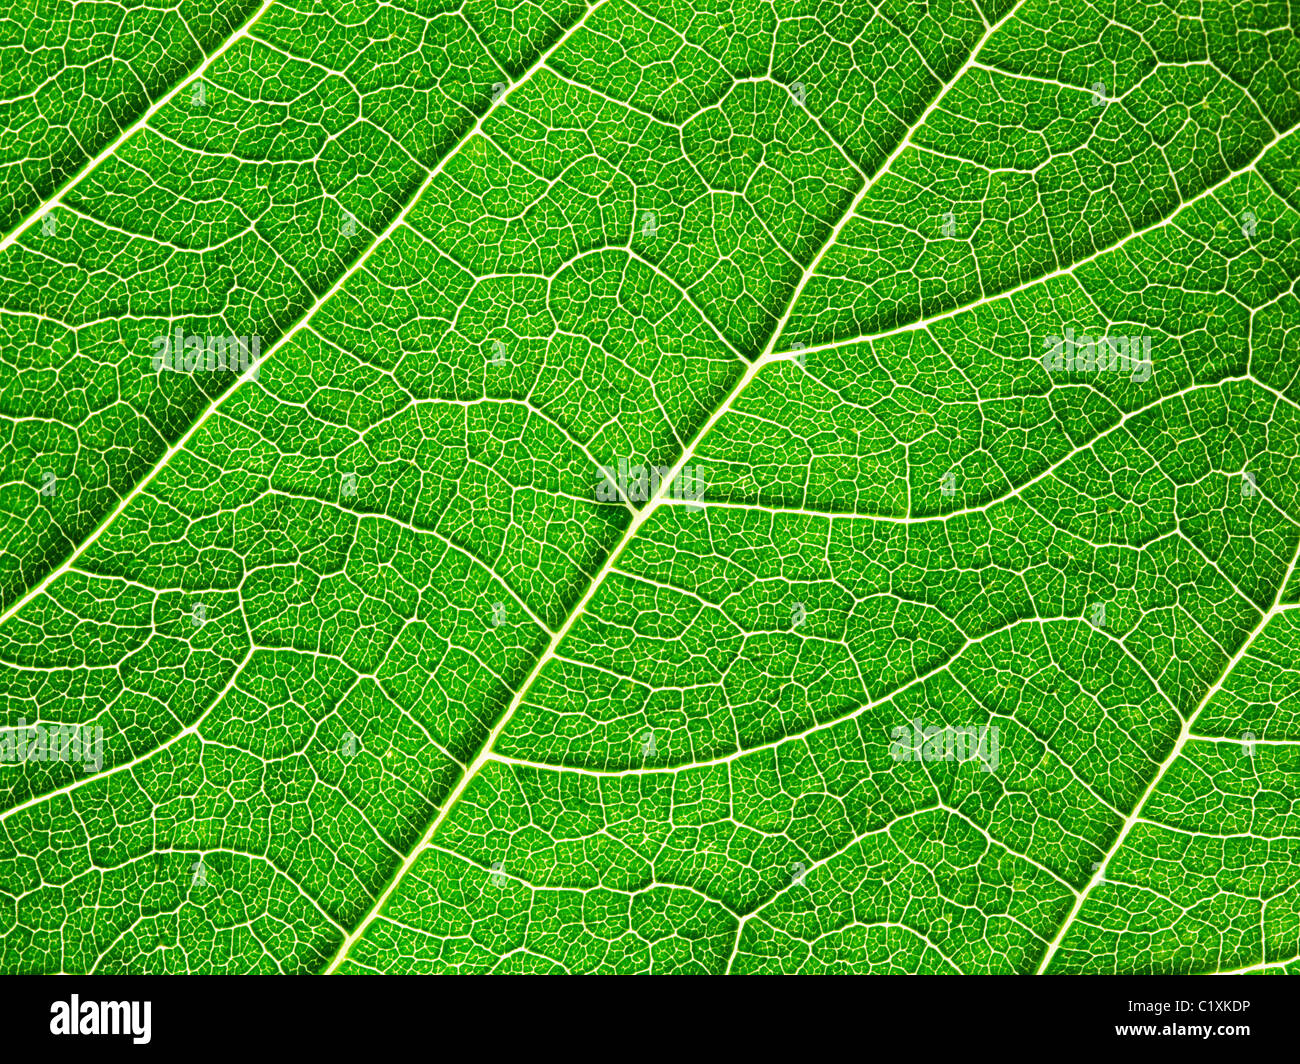 Texture created by the detail of a large green leaf Stock Photo